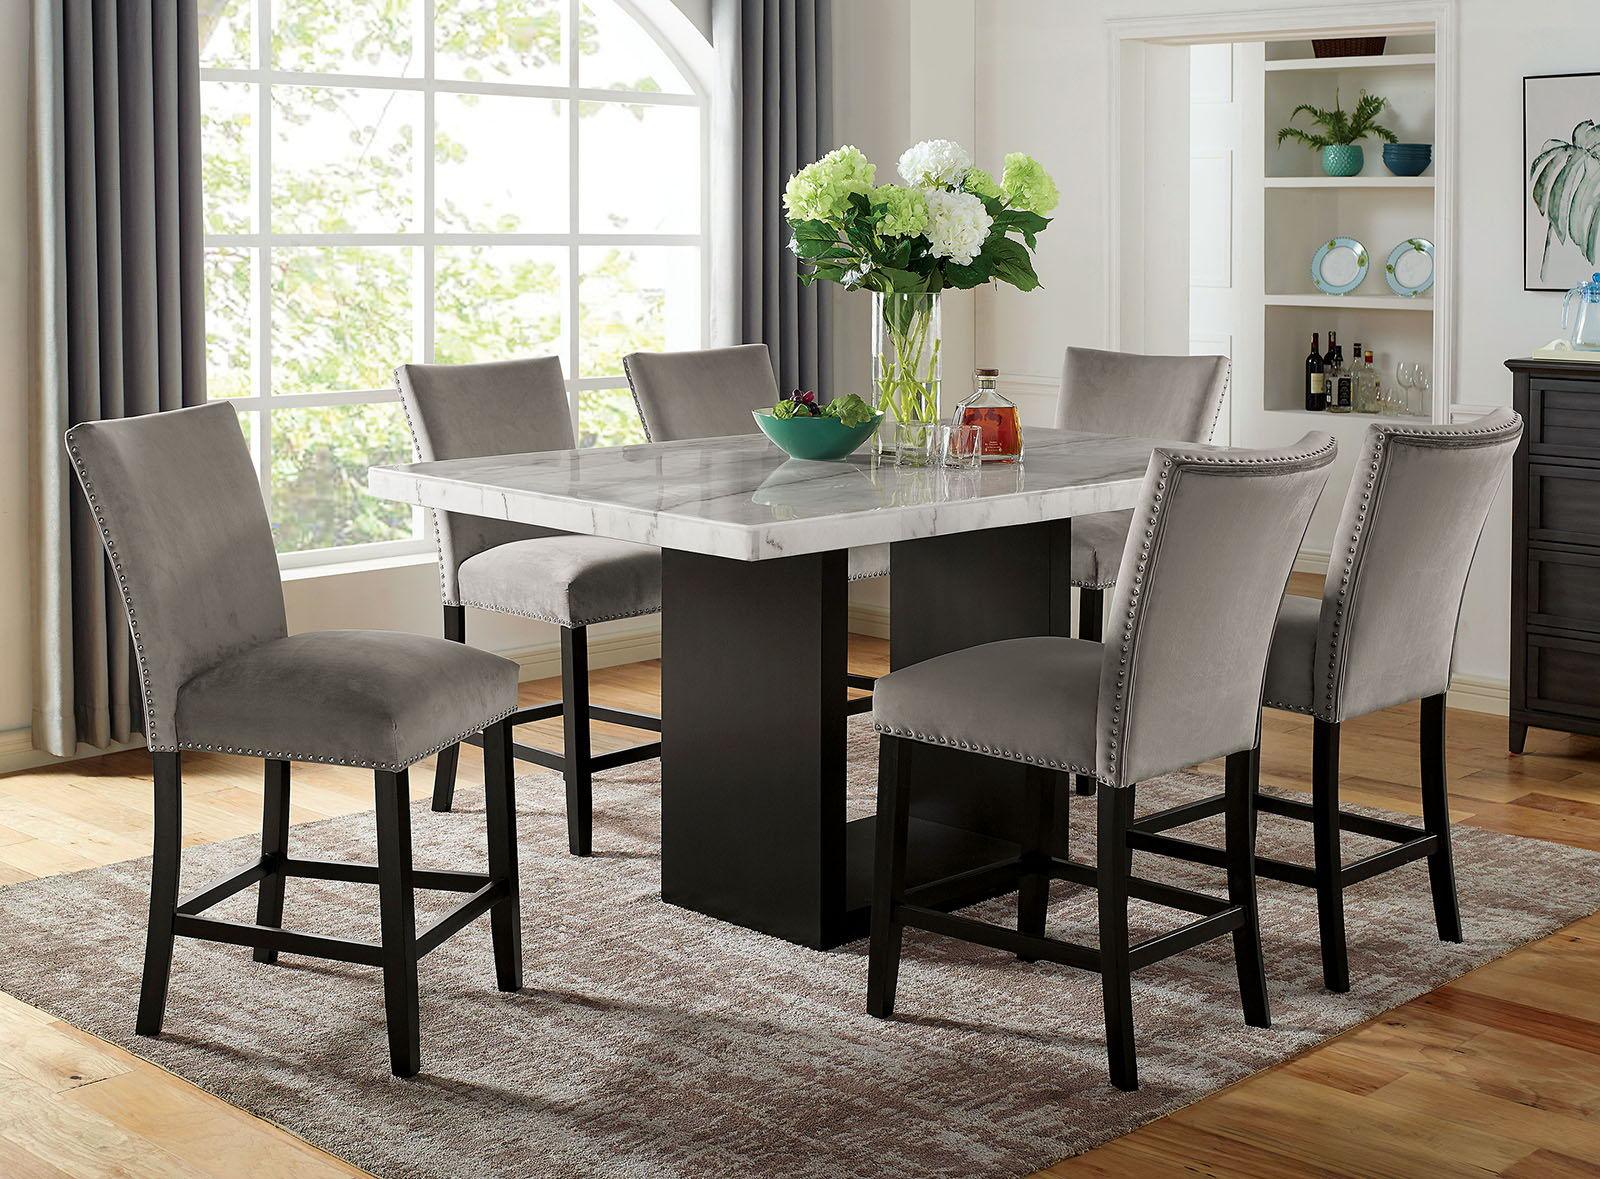 Furniture of America - Kian - Counter Height Dining Table - White / Black - 5th Avenue Furniture